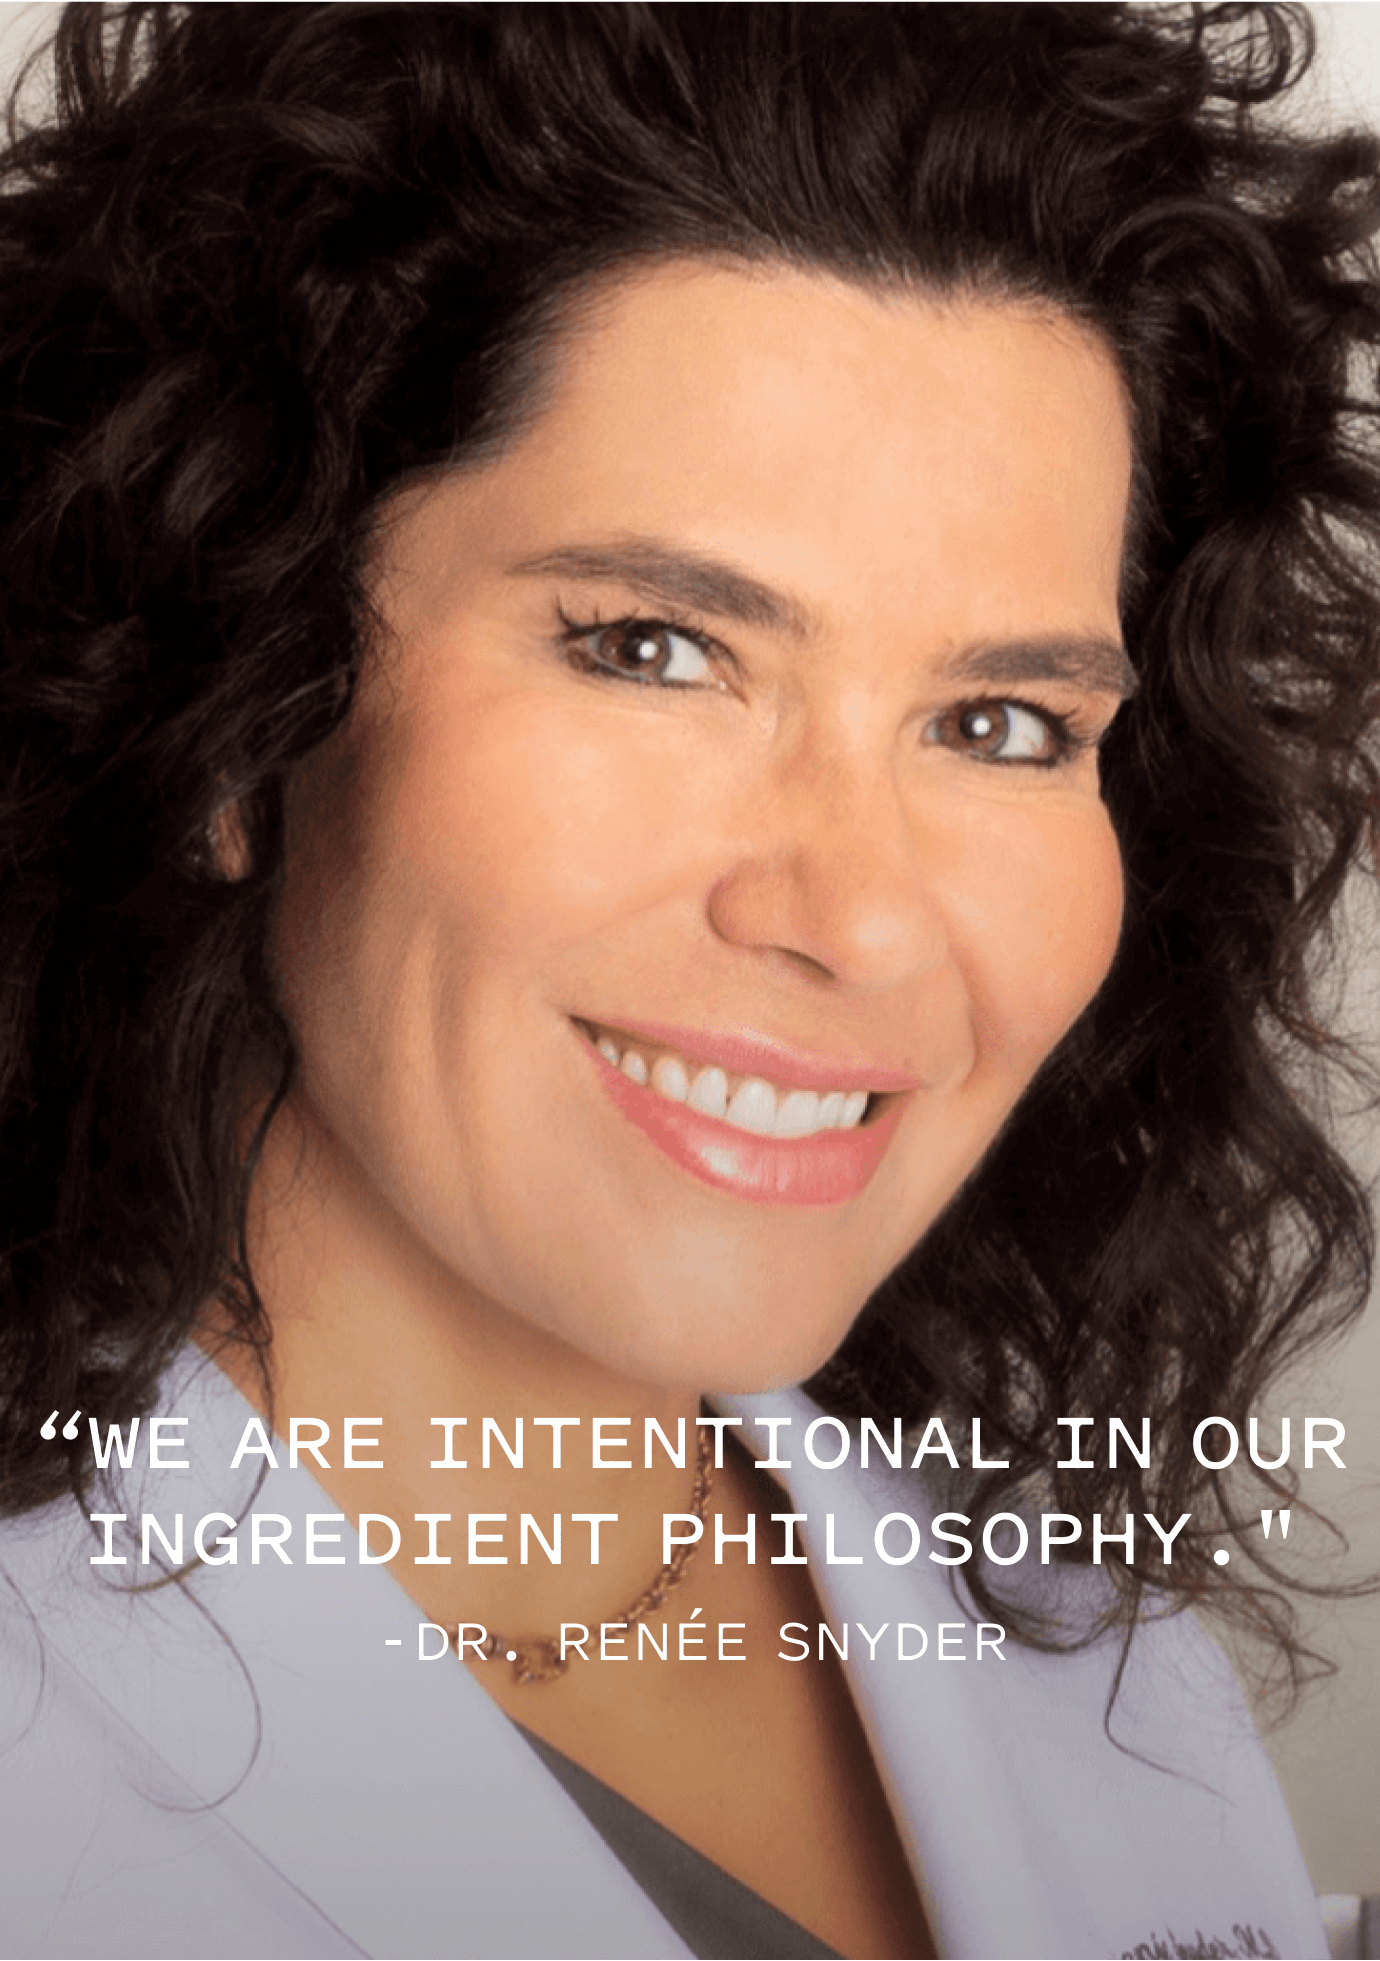 We are intentional in our ingredient philosophy. -Dr. Renée Snyder